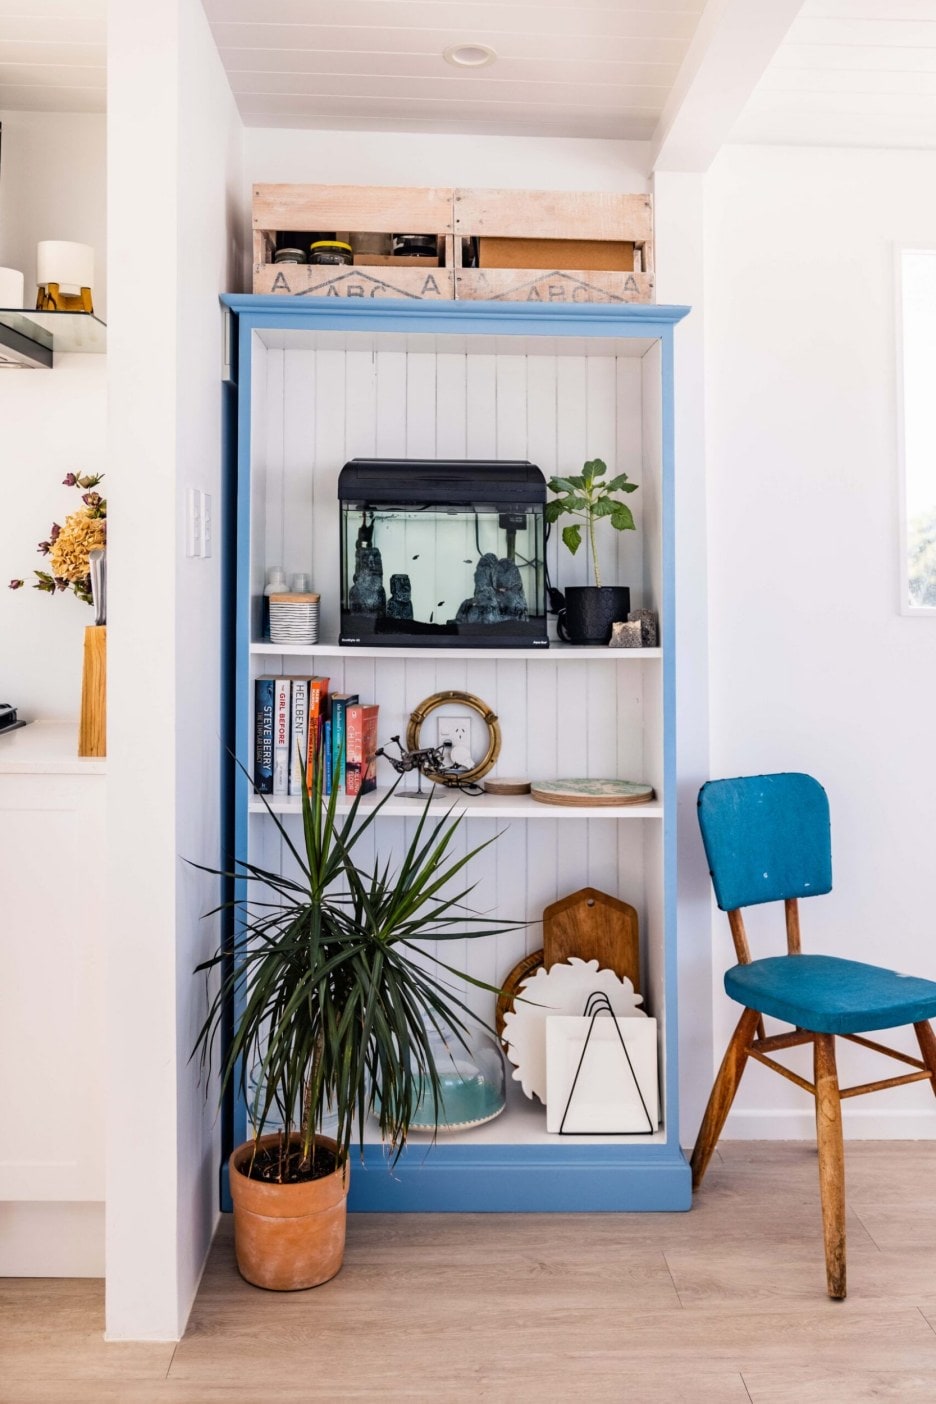 A blue and white shelf next to a blue chair